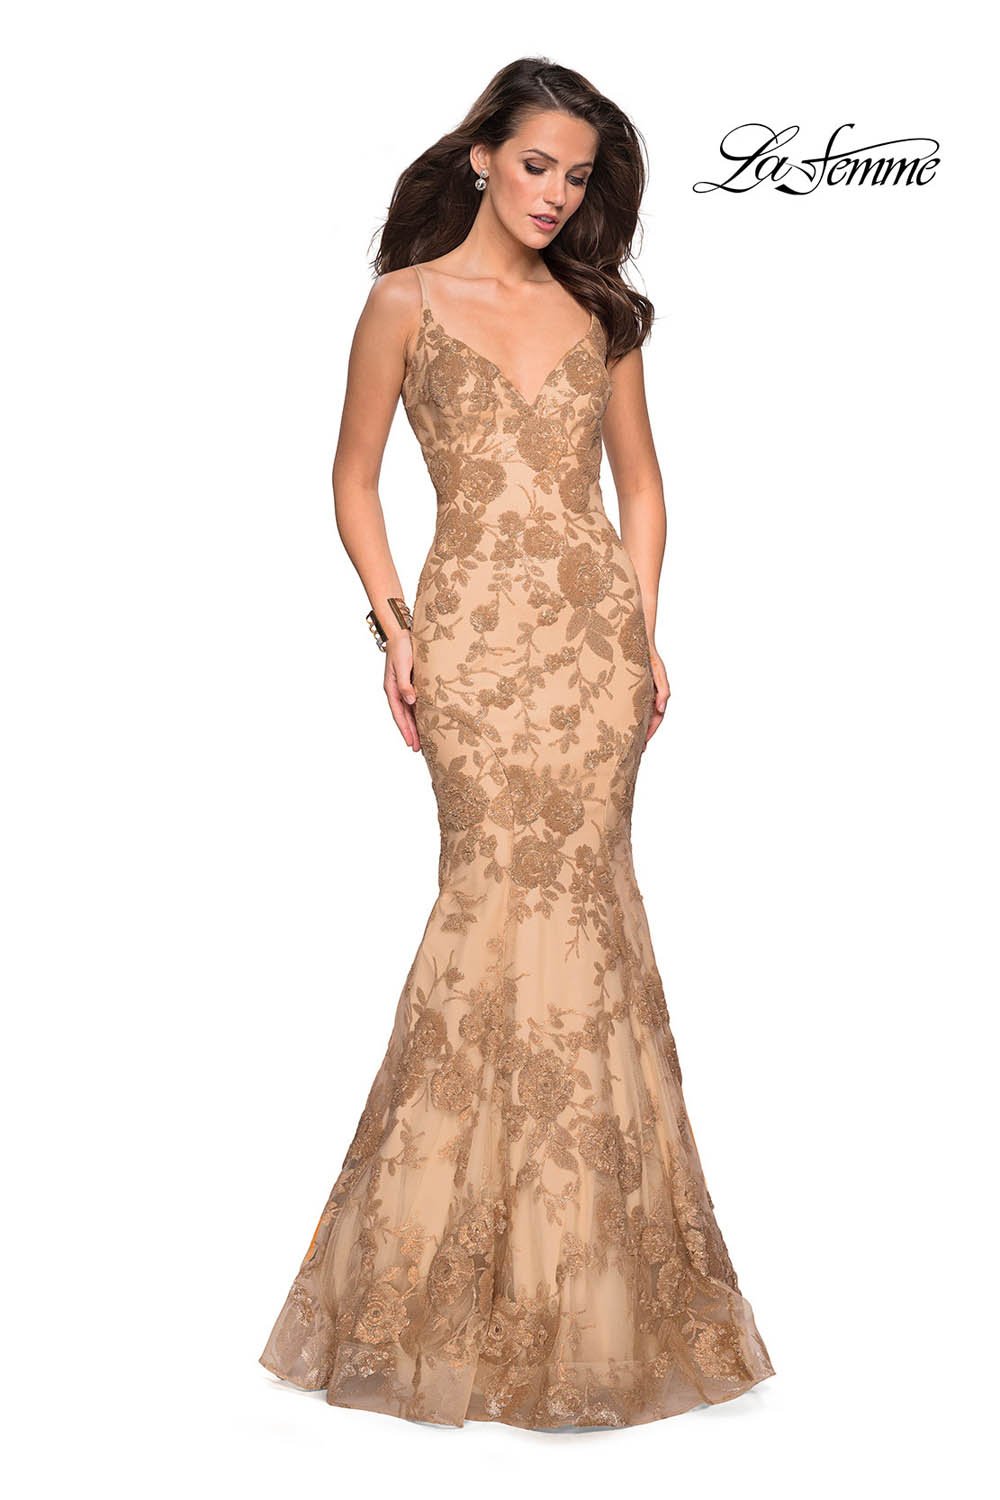 La Femme 27285 dress images in these colors: Light Gold.